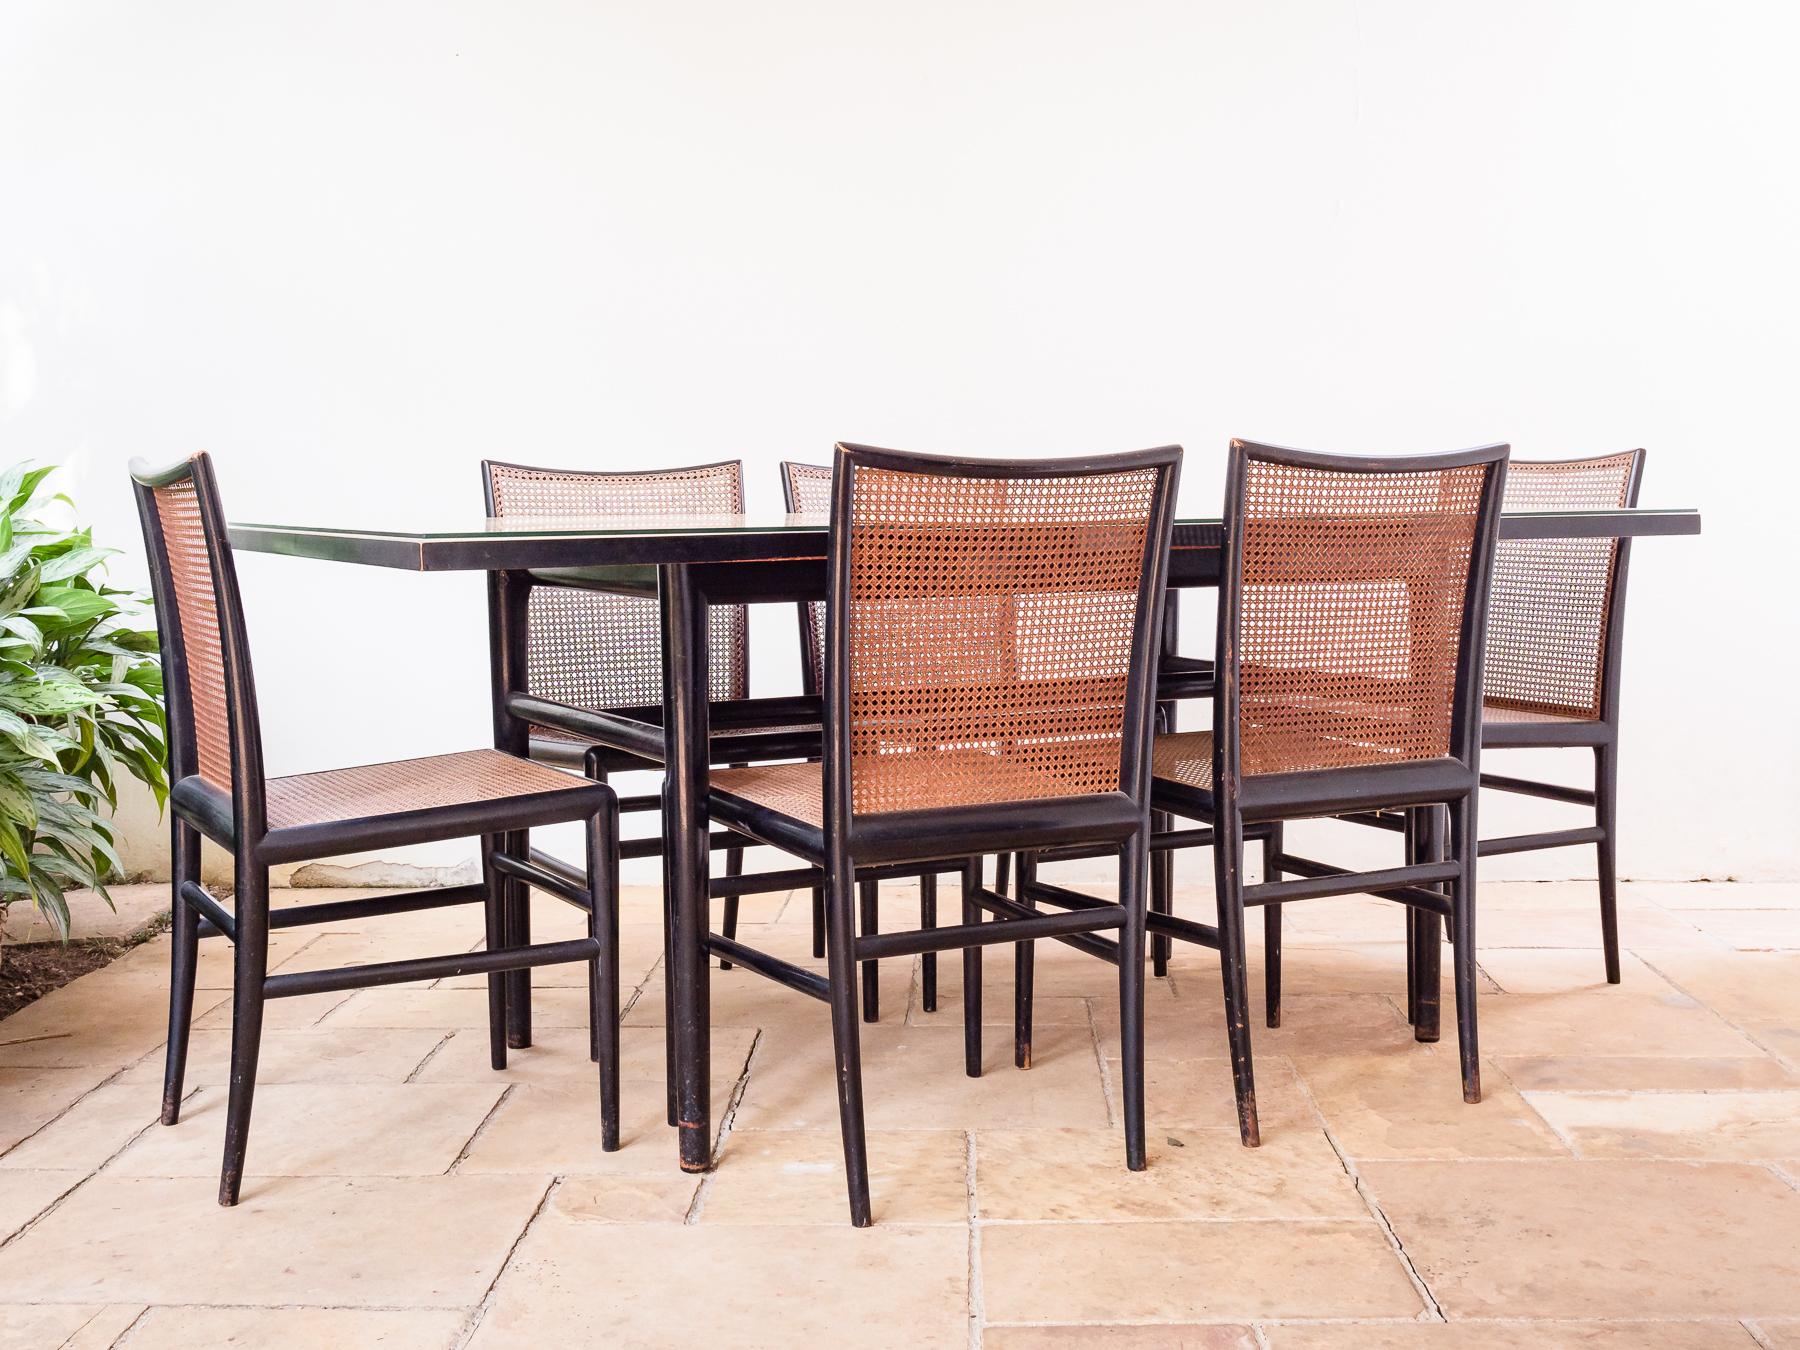 Brazilian Mid-Century Modern dining set, designed by Jacob Ruchti of the Branco & Preto Collective, 1952.
Catalogued in the book about the work of Branco & Preto on several different pages, this set is an epitome of the elegance and minimalism of